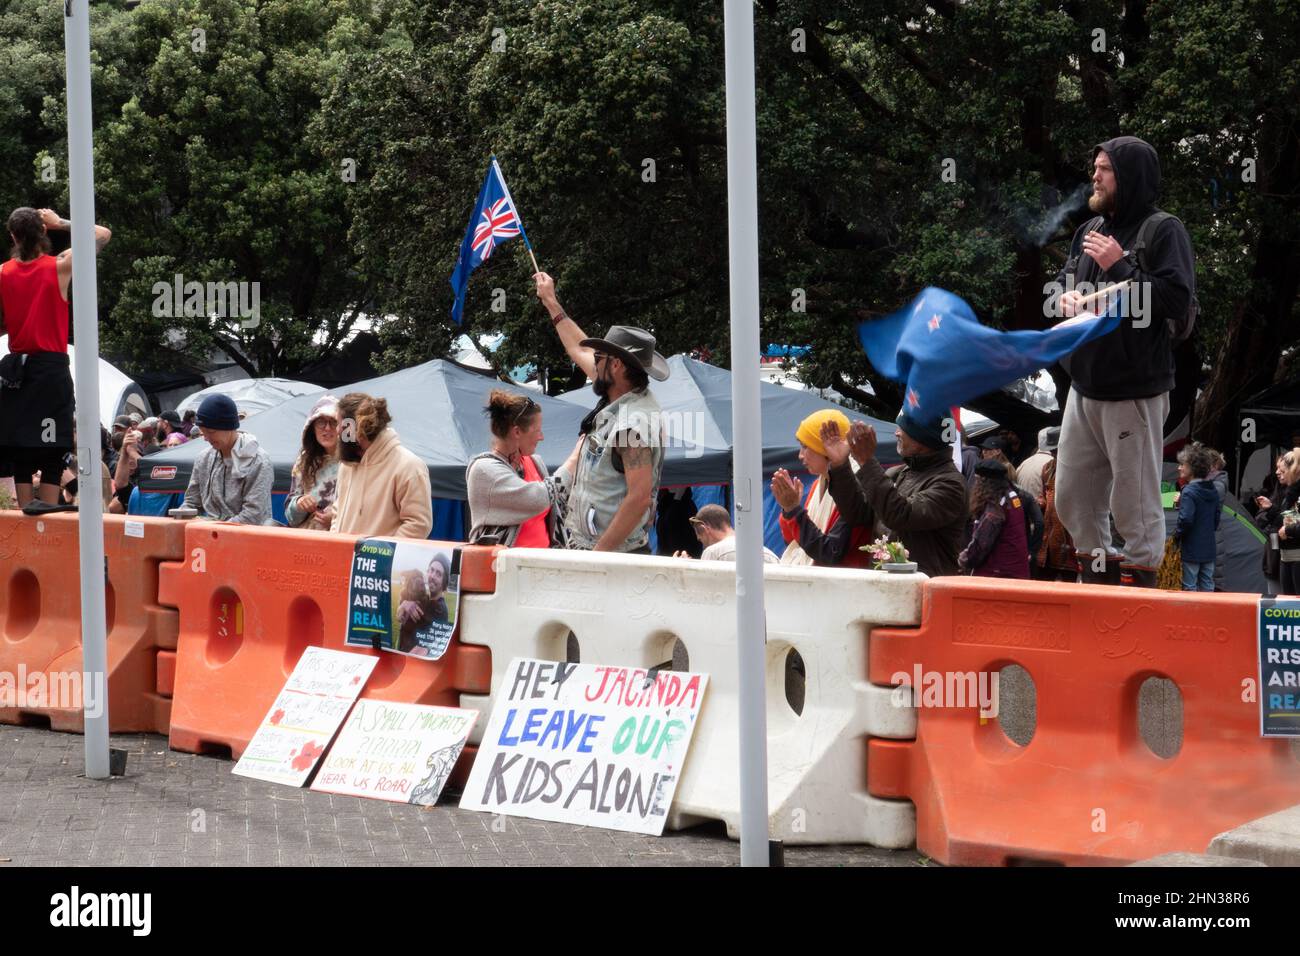 Crowd of people protesting covid vaccine mandates in front of parliament in Wellington, New Zealand Stock Photo